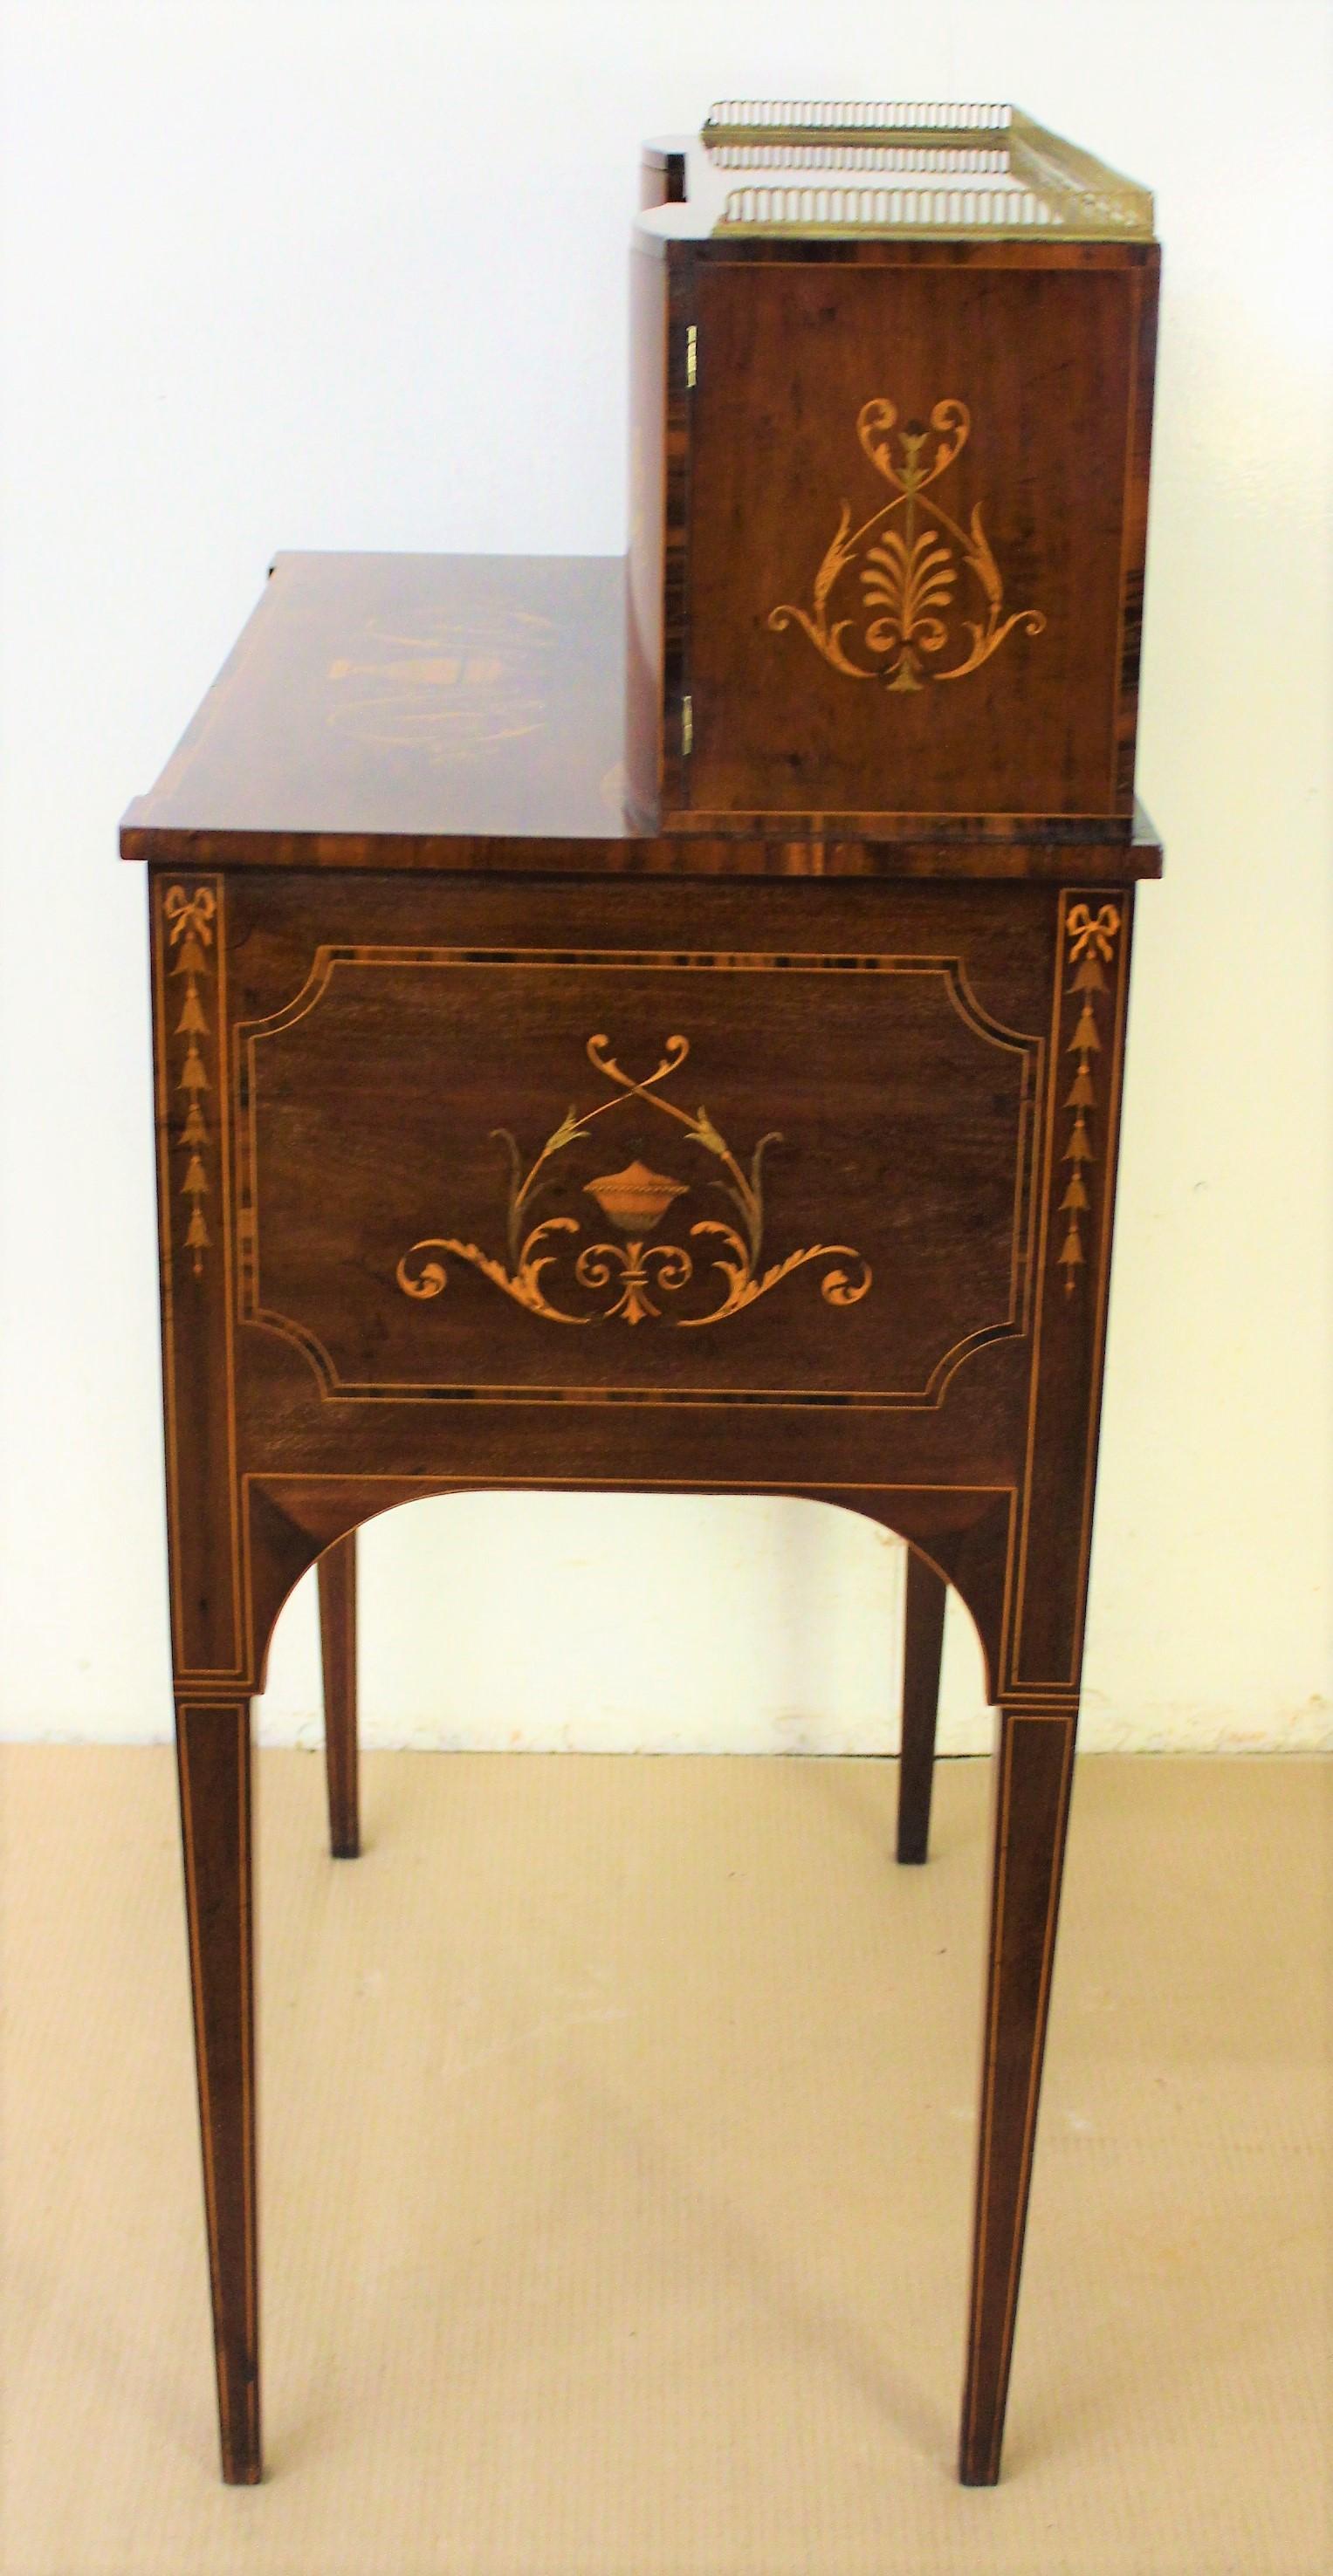 A fine quality inlaid mahogany bonheur du jour by the prestigious cabinet maker Edwards and Roberts of London. Of excellent construction in solid mahogany with attractive mahogany veneers, cross banded in tulip wood. Decorated throughout with